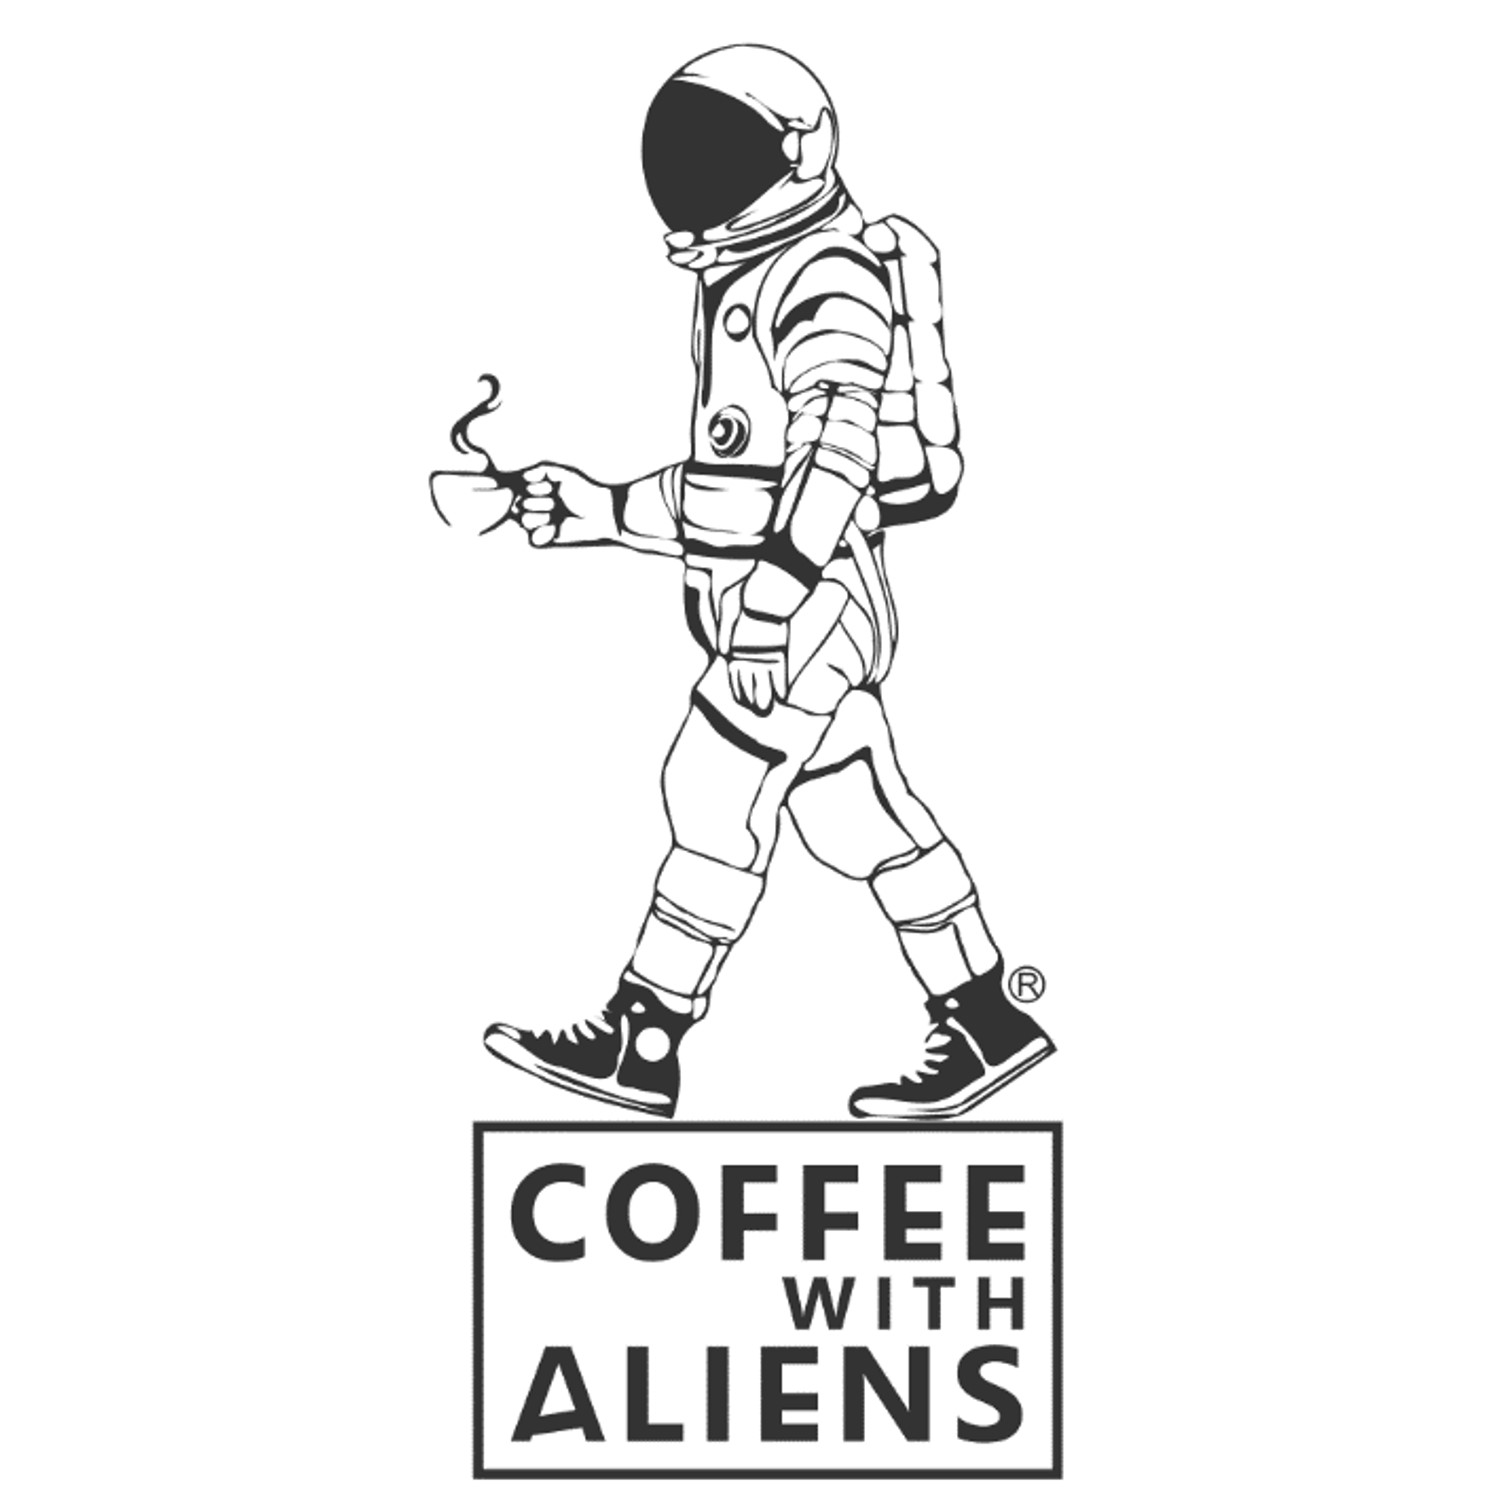 COFFEE WITH ALIENS